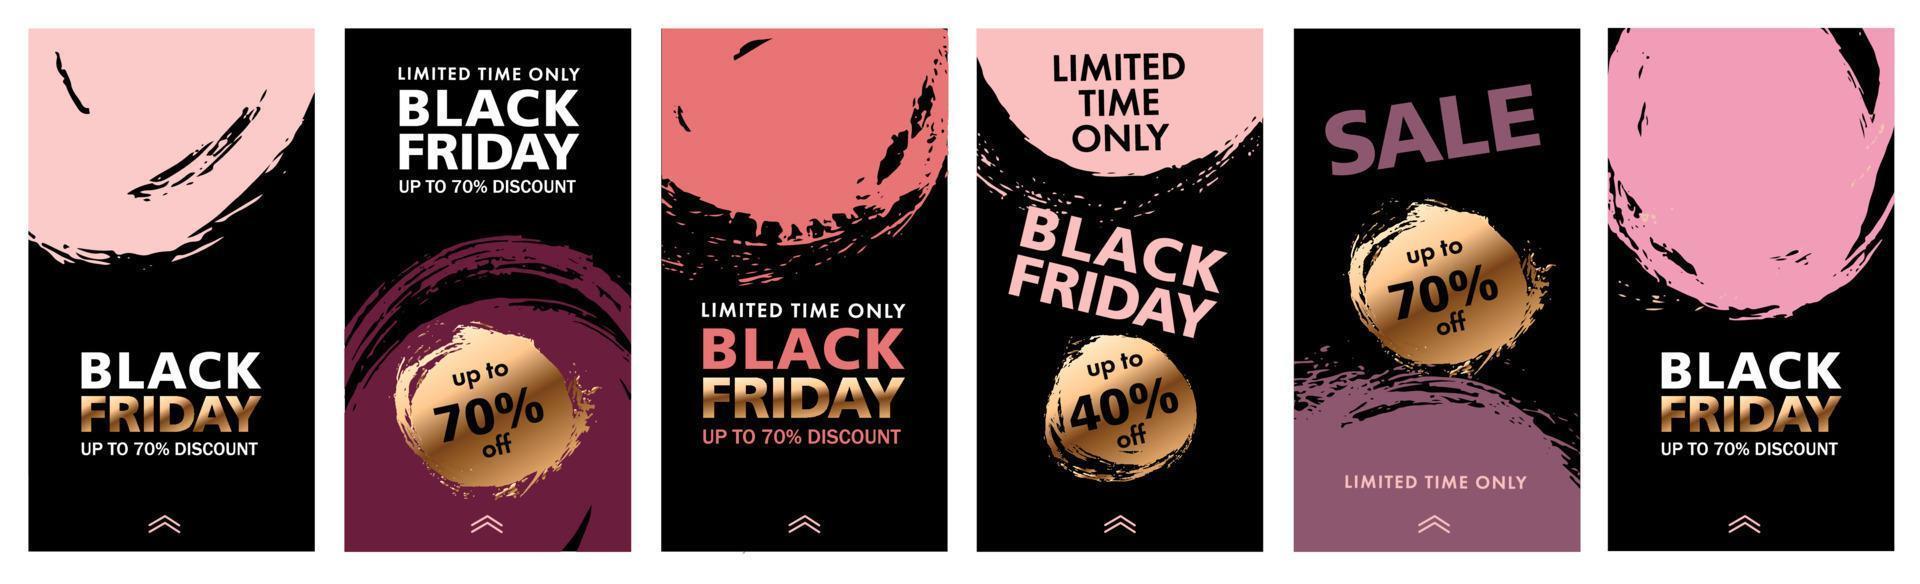 Black Friday, grunge style. Editable Stories template. Vector. vector